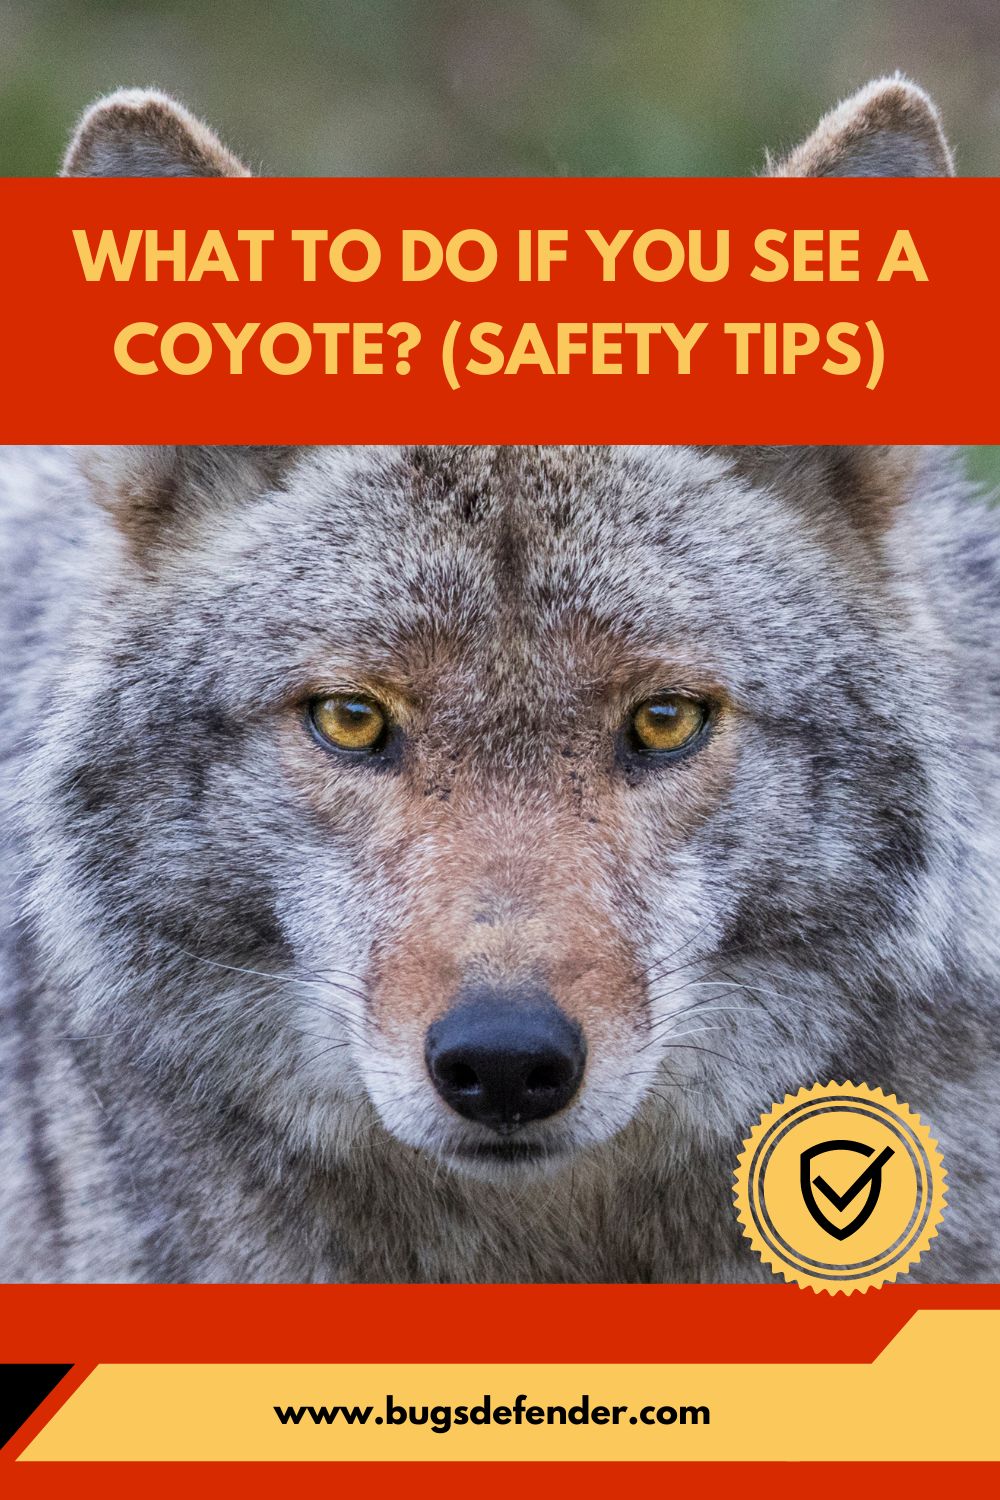 What To Do If You See a Coyote pin2